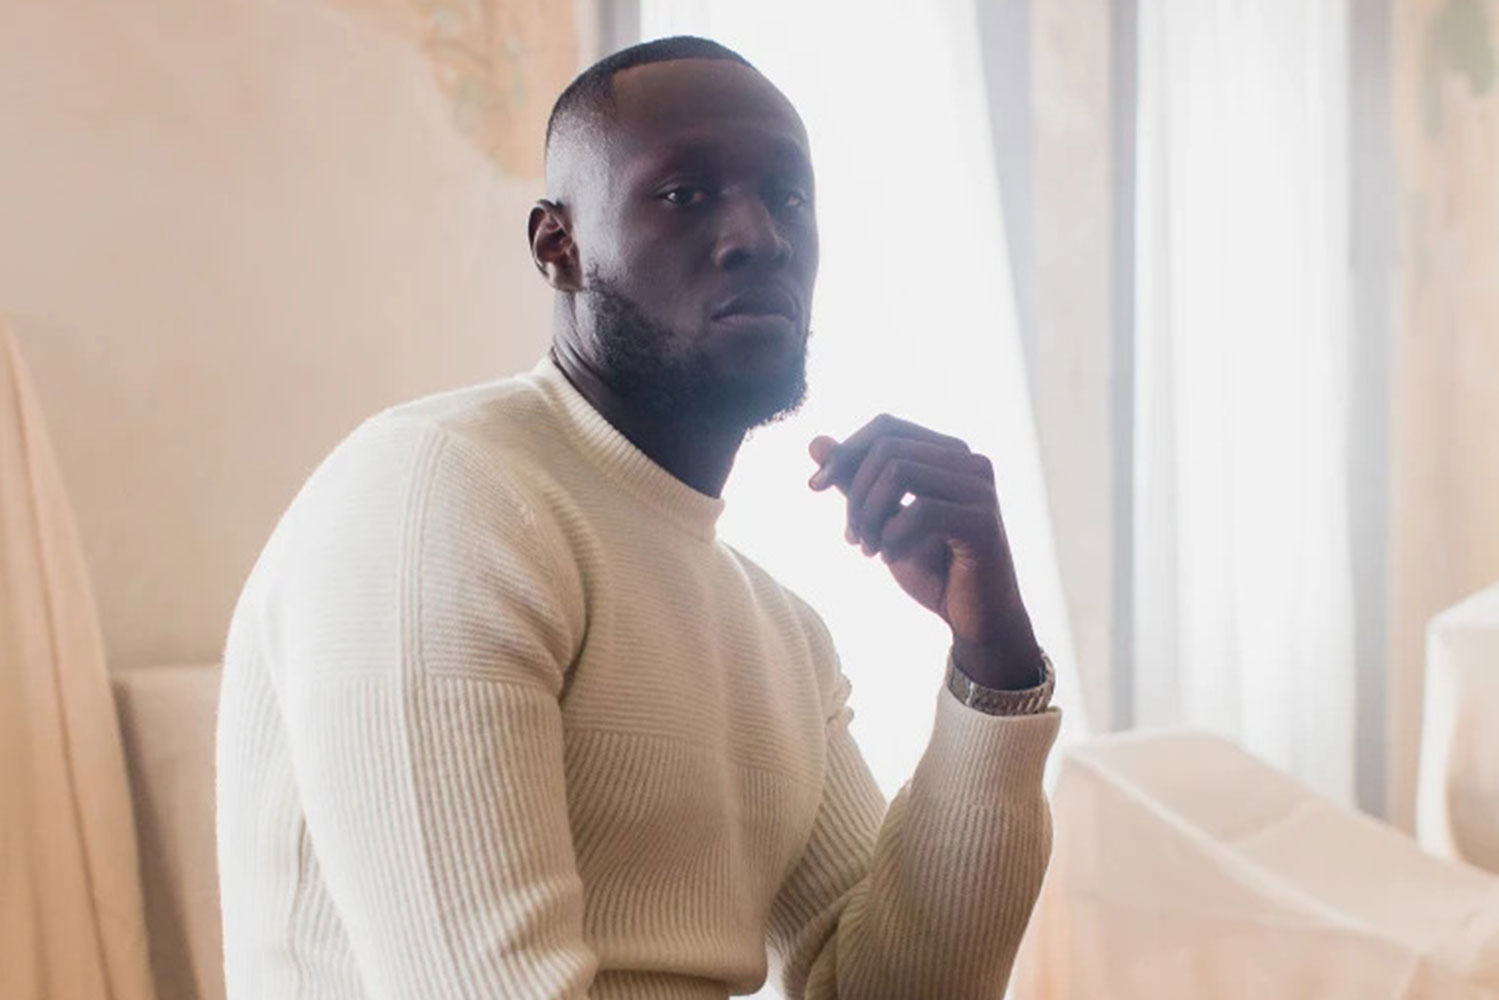 Stormzy wearing a white sweater posing for a photo with an all white background.